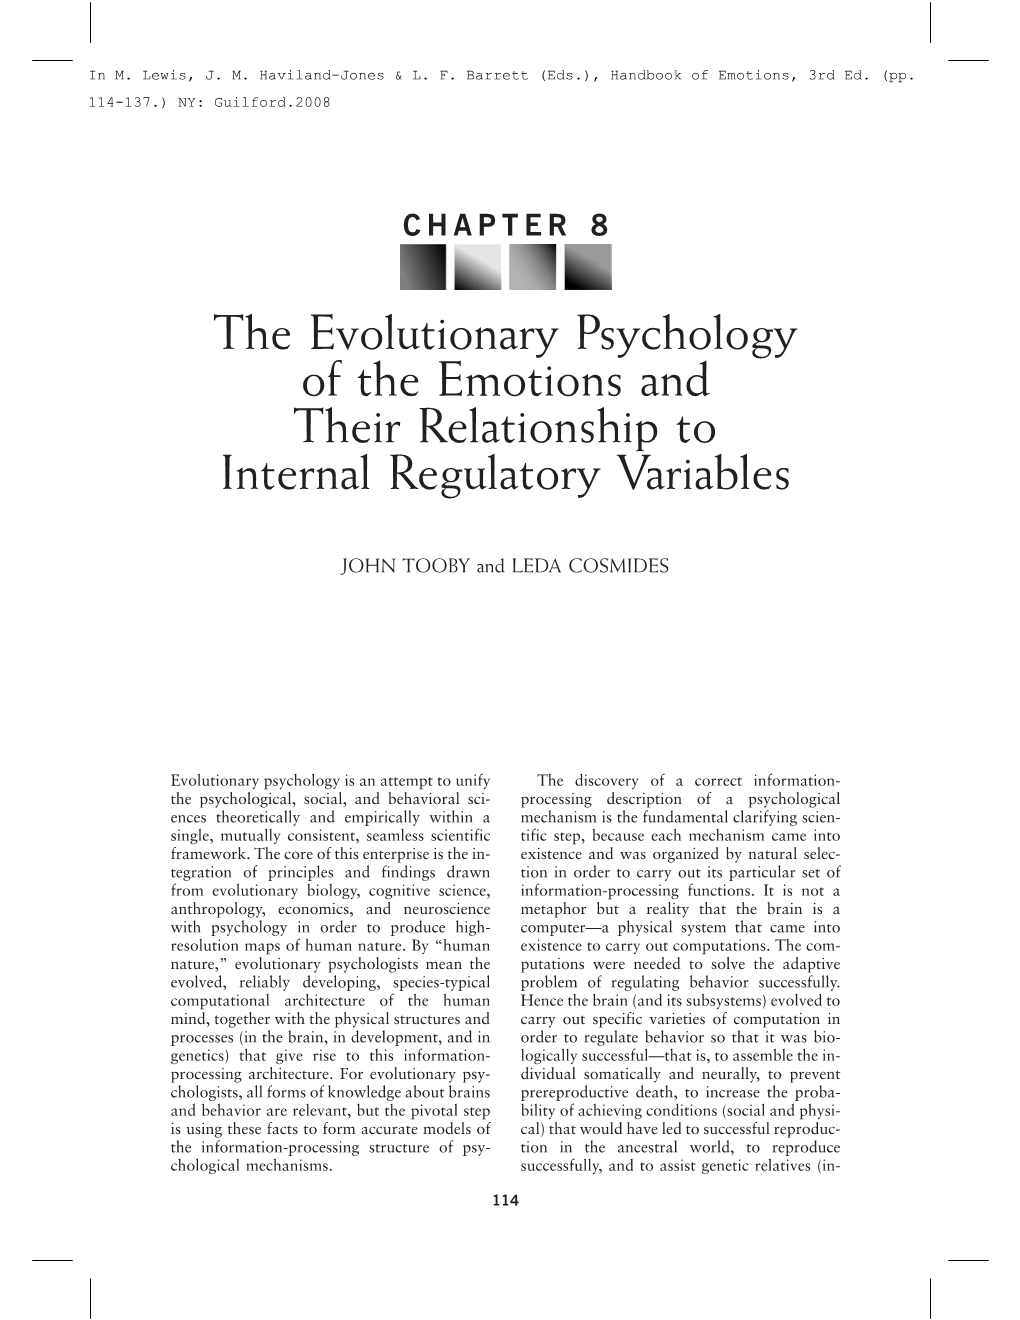 The Evolutionary Psychology of the Emotions and Their Relationship to Internal Regulatory Variables